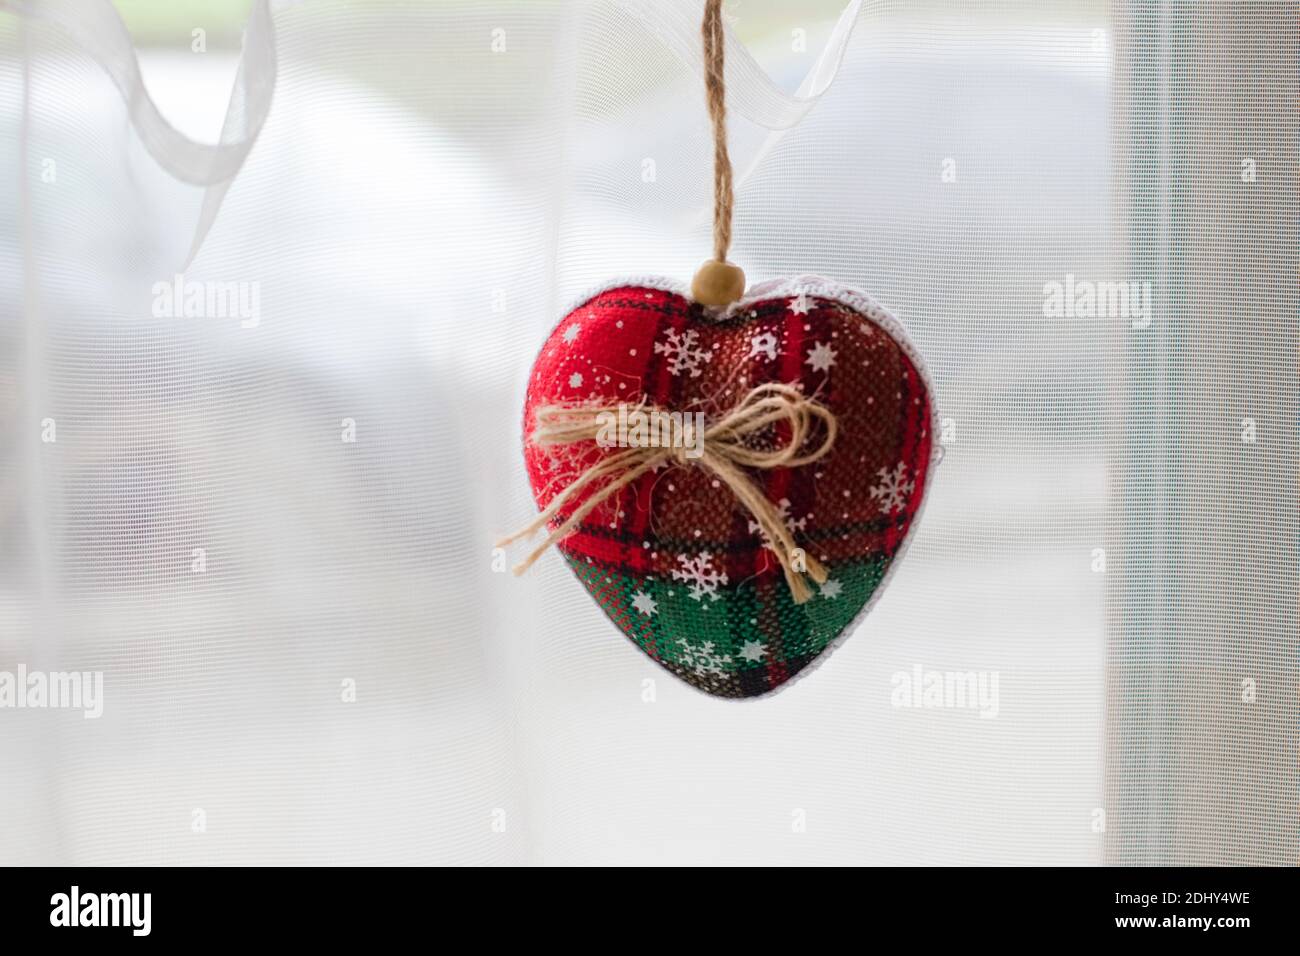 estive decor window. This handmade soft Christmas tree toy made of fabric of red and green color with a bow of string hangs on the window. New Year an Stock Photo